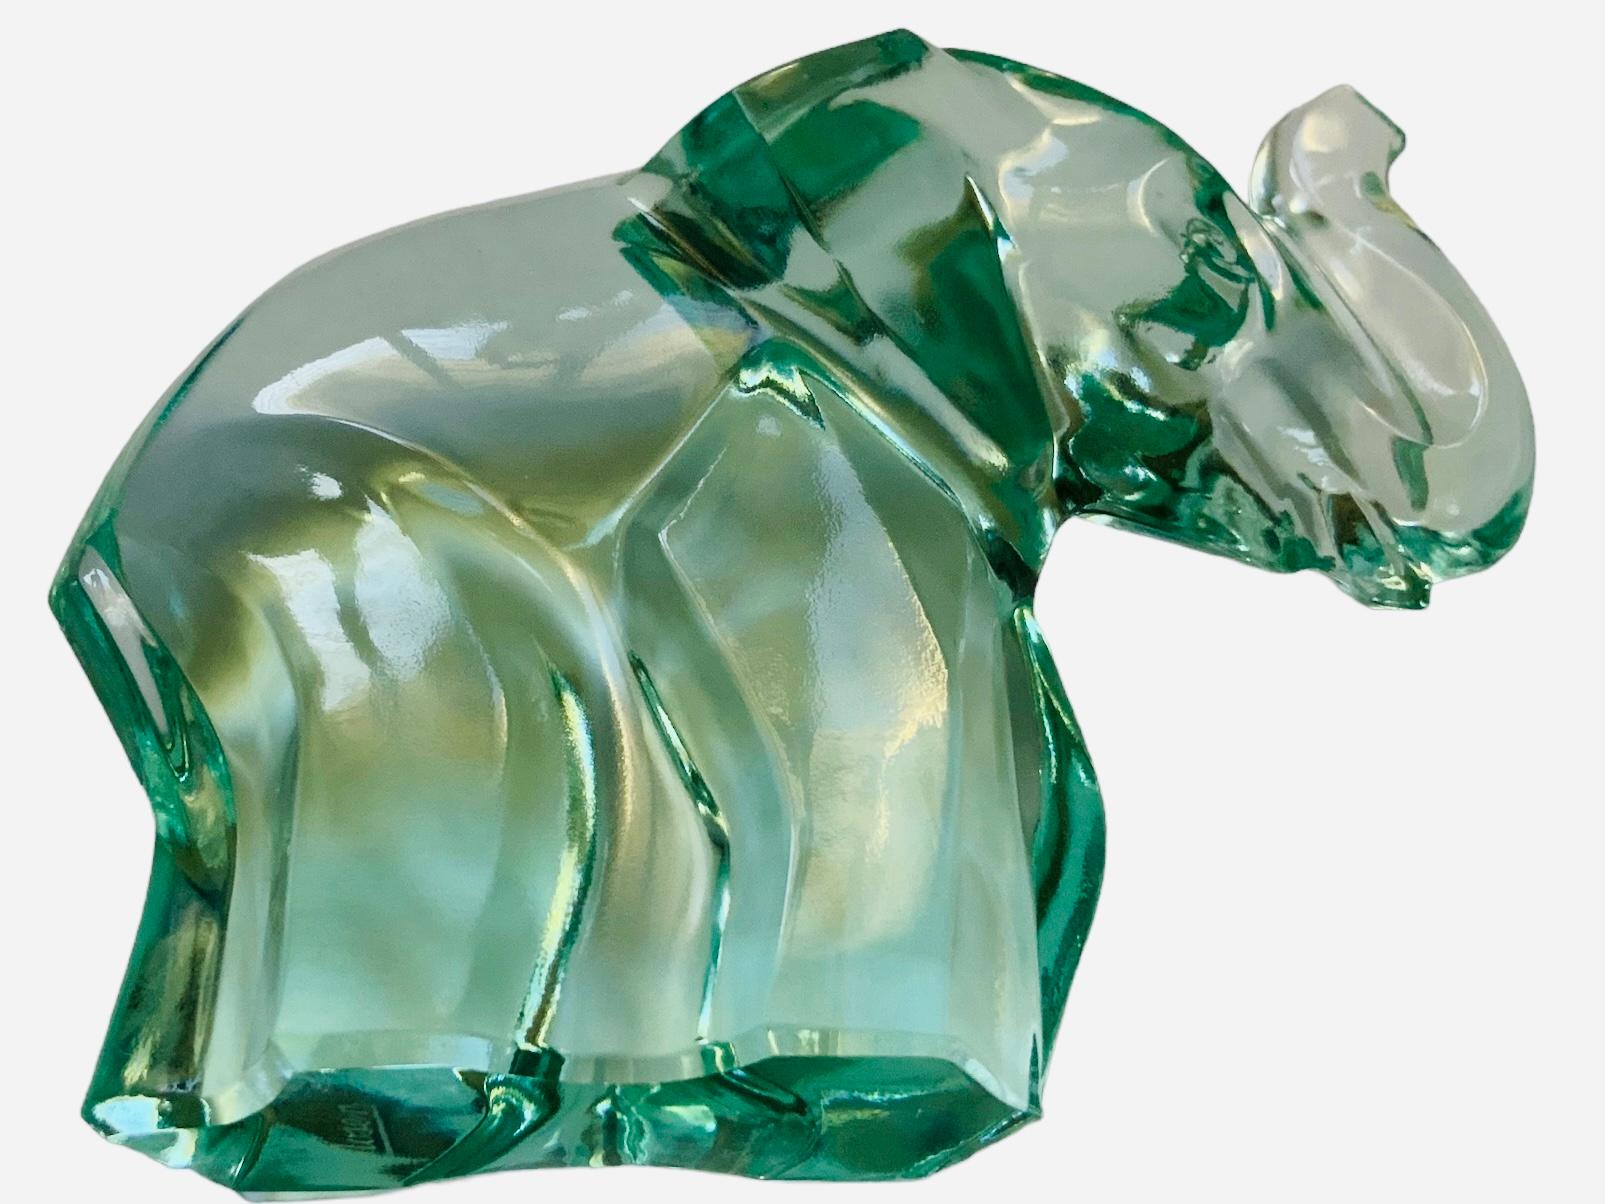 This is a Moser light green crystal sculpture of a happy elephant with a large trunk up. Below the base is signed Moser. Elephants are symbol of good luck, wisdom and prudence.